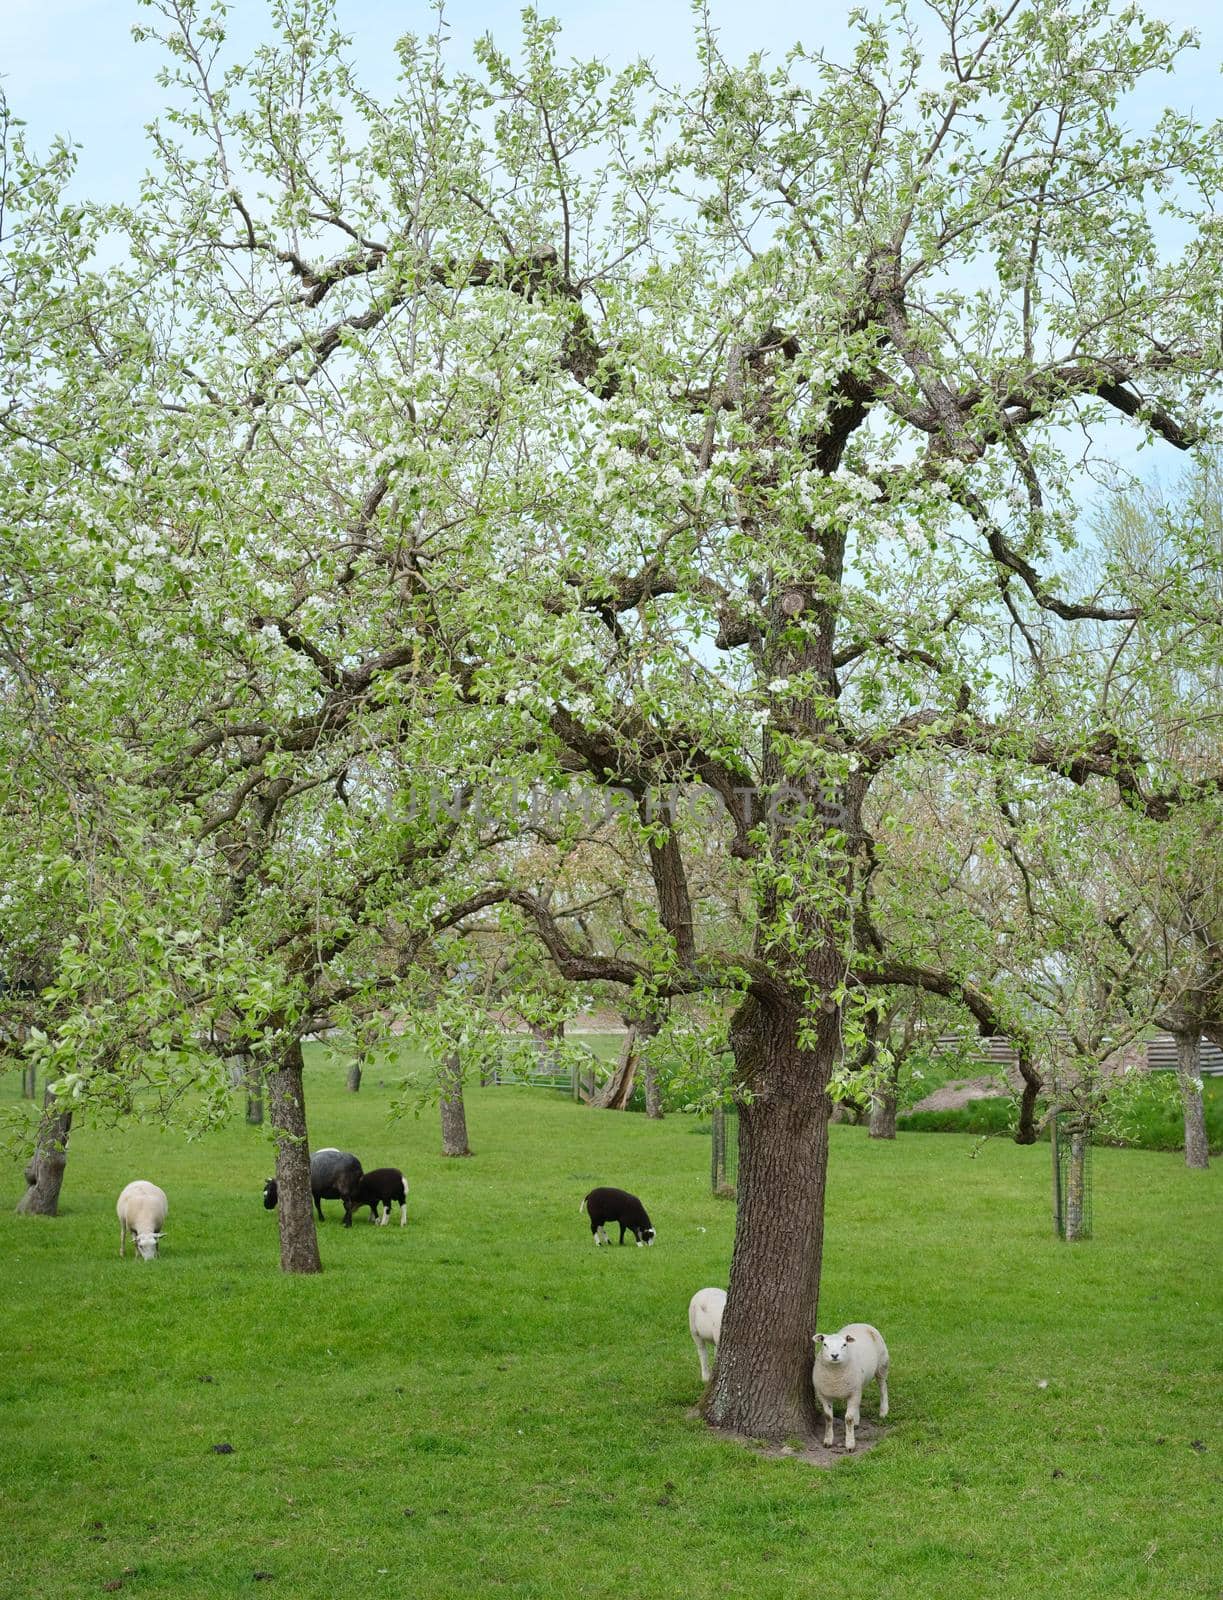 sheep and lambs in spring orchard under blue sky with blossoming trees near Gouda in holland